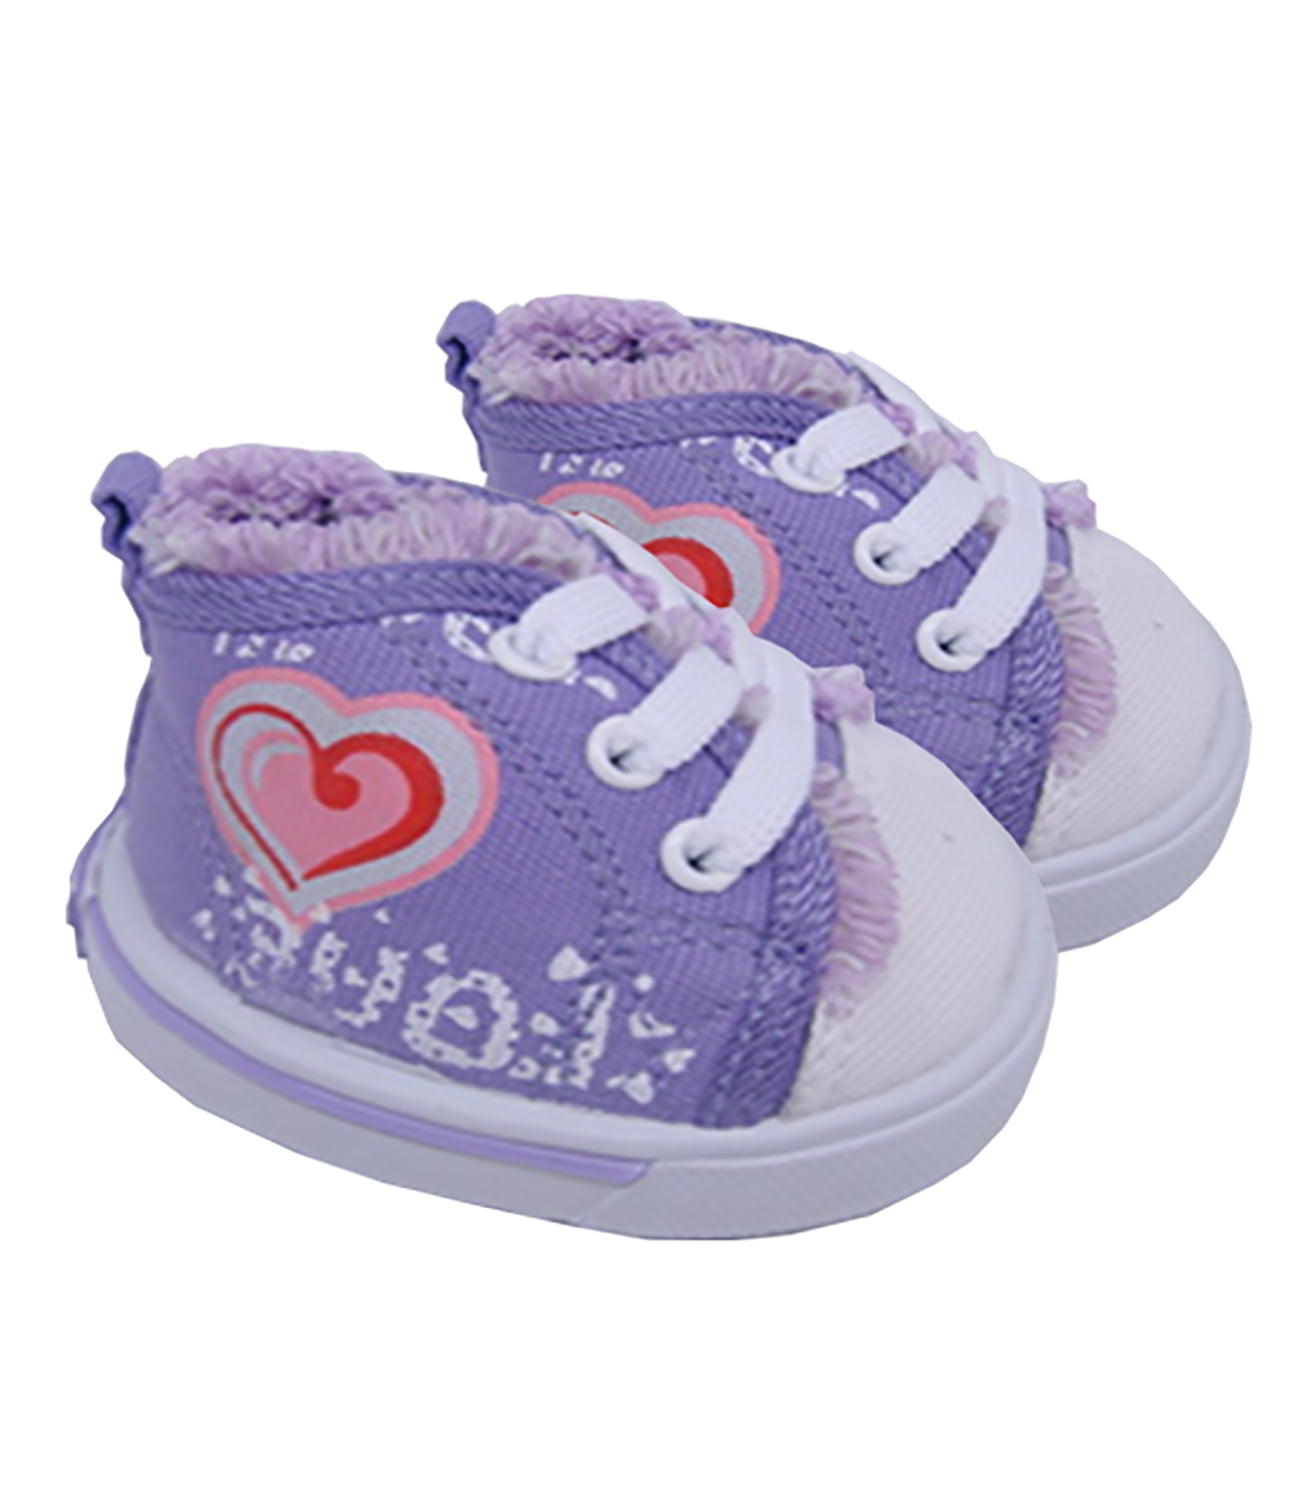 White Sneakers Fits Most 14-18 Build-a-bear and Make Your Own Stuffed Animals 